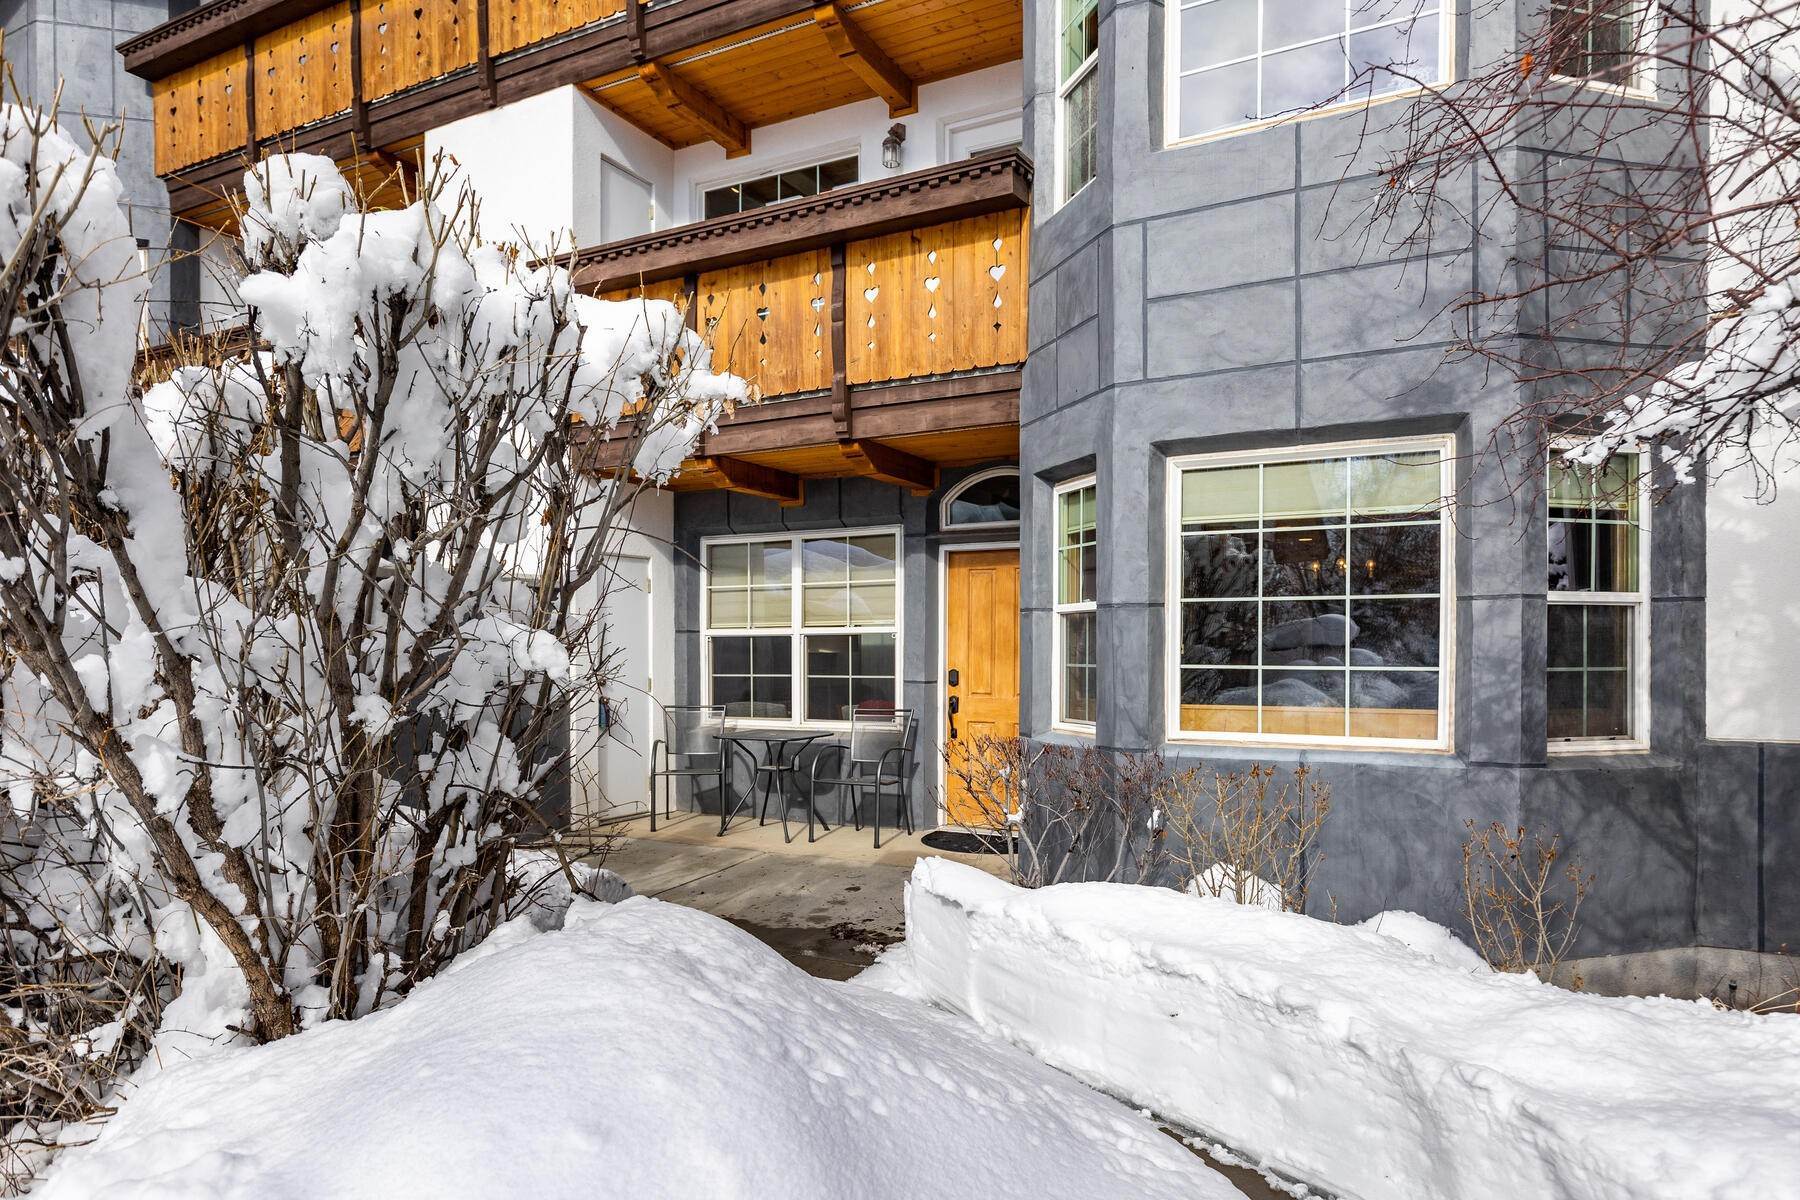 Single Family Homes for Sale at Get Away Today to the Secluded Swiss-themed Zermatt Resort 781 W Pot Rock Rd Midway, Utah 84049 United States